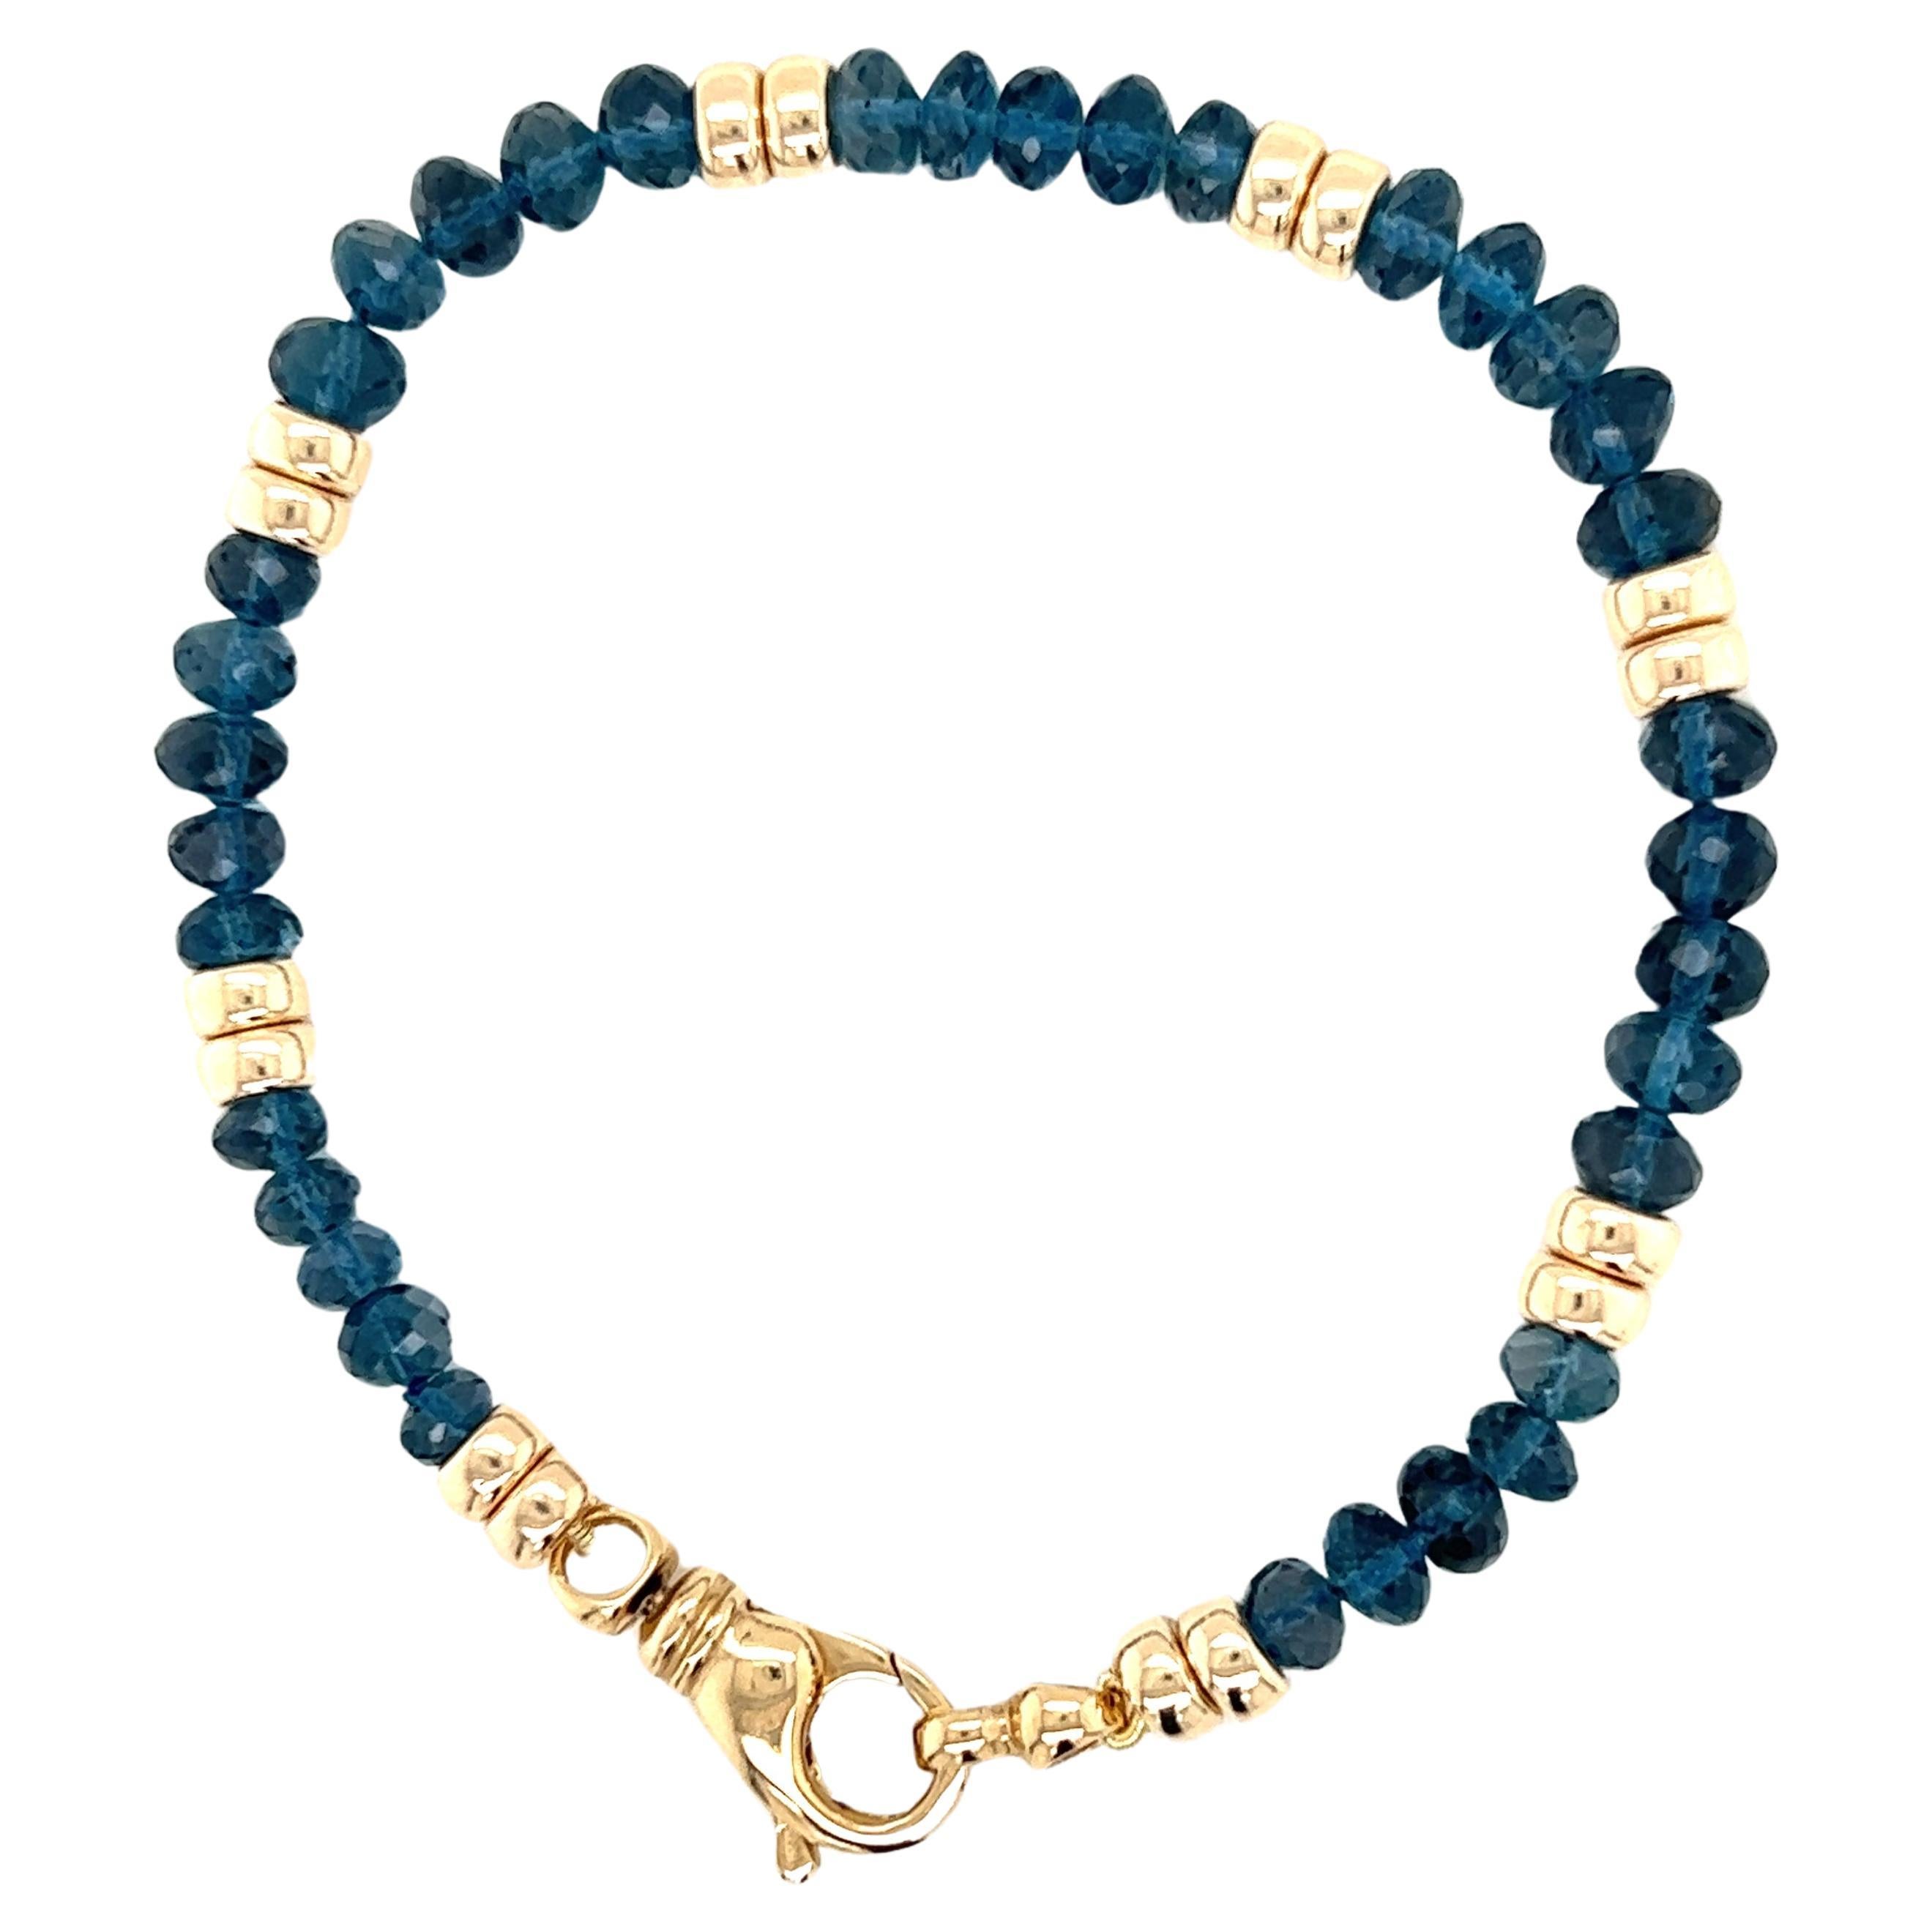 Gem Quality Blue Topaz and 14k Yellow Gold Bead Bracelet  For Sale